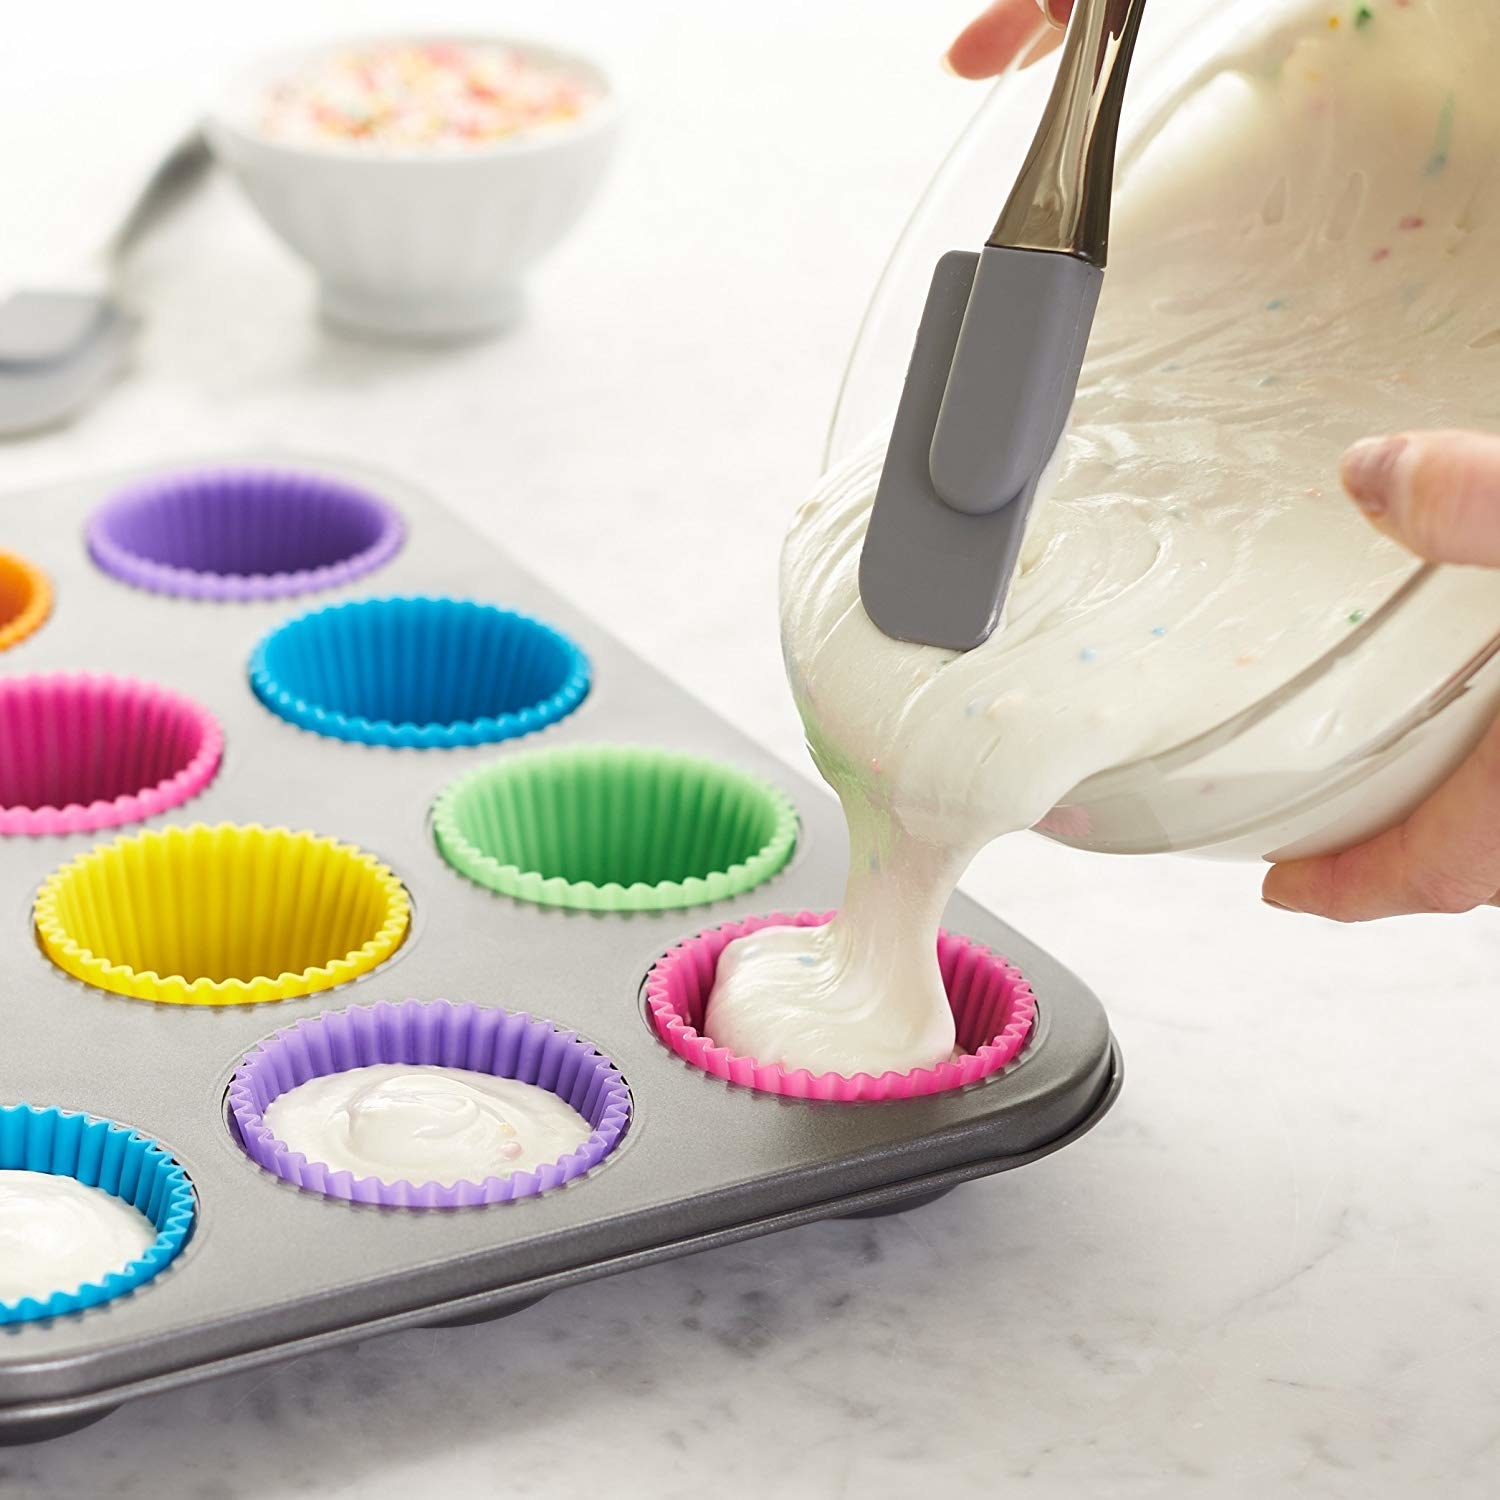 A person pouring cupcake batter into the silicone cups